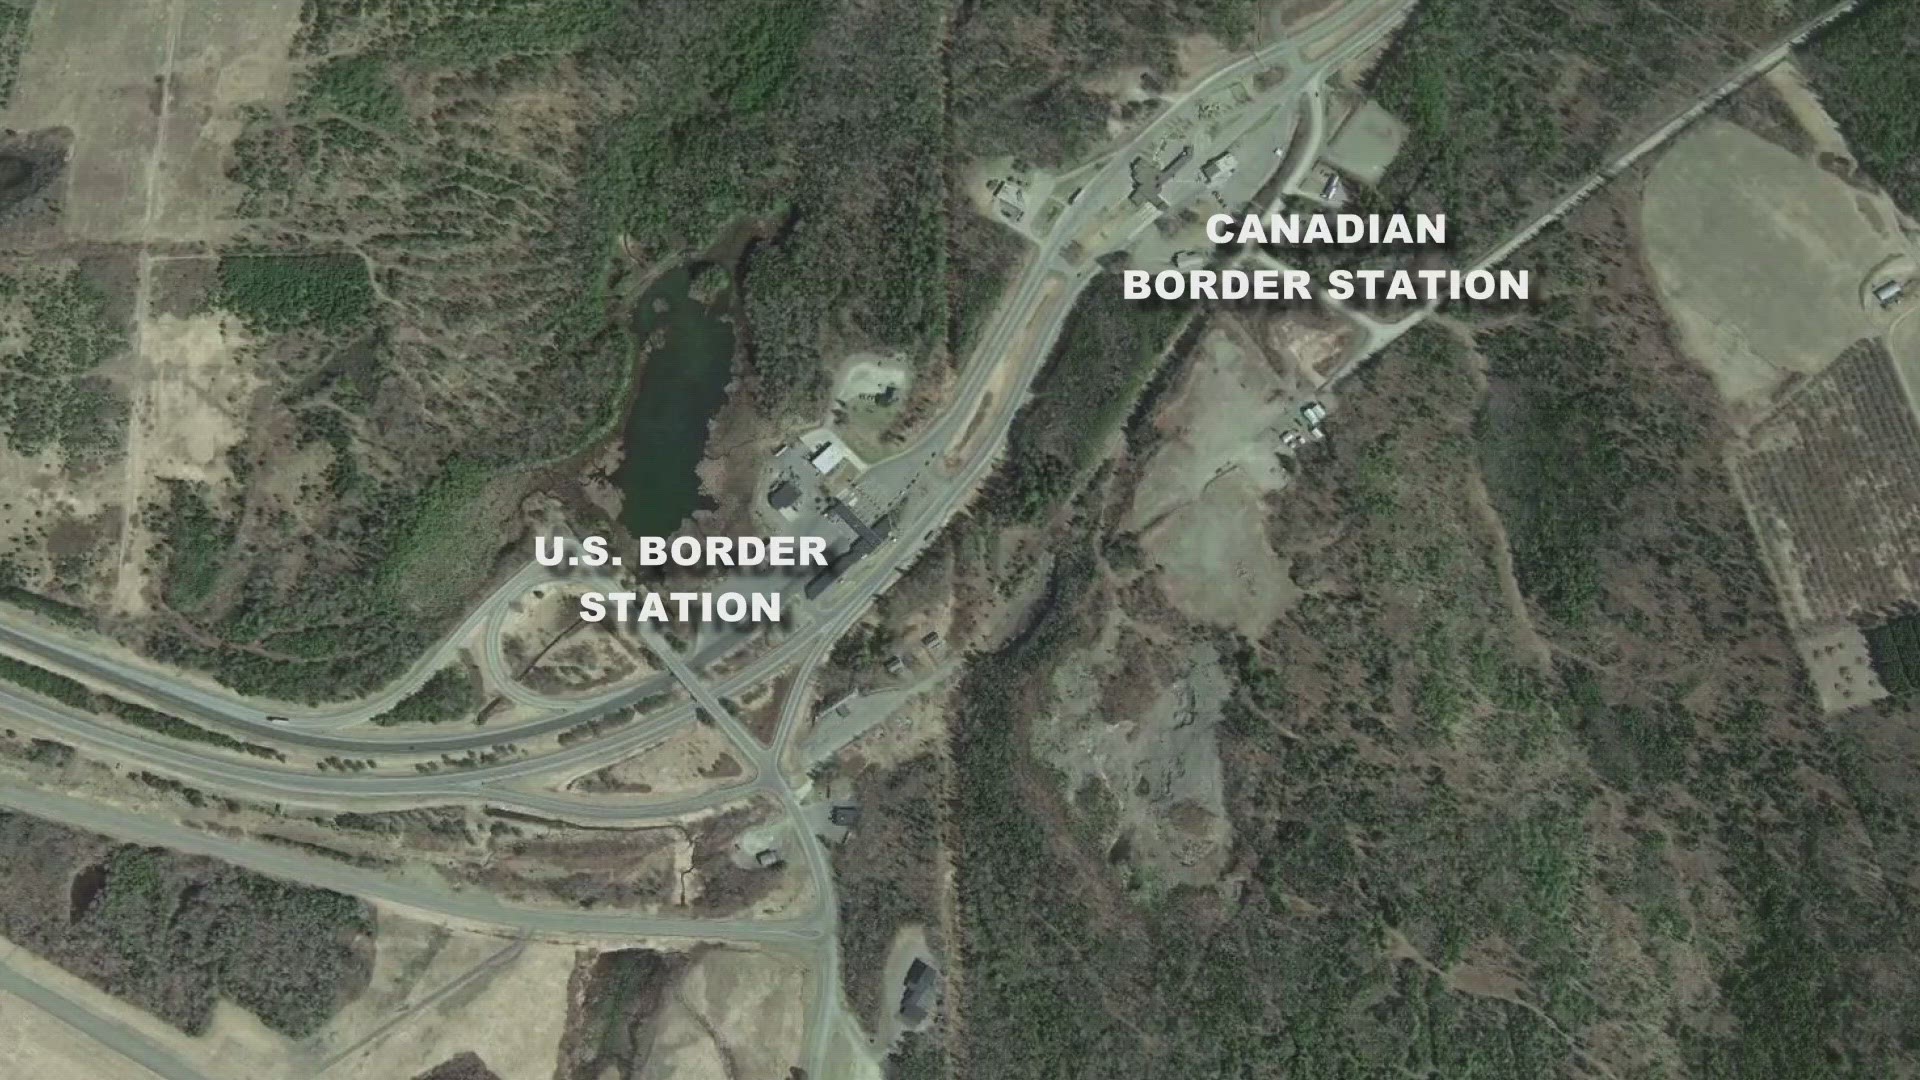 As of approximately 9:45 p.m., all lanes at the border crossing between Houlton, Maine and Woodstock, New Brunswick have reopened.